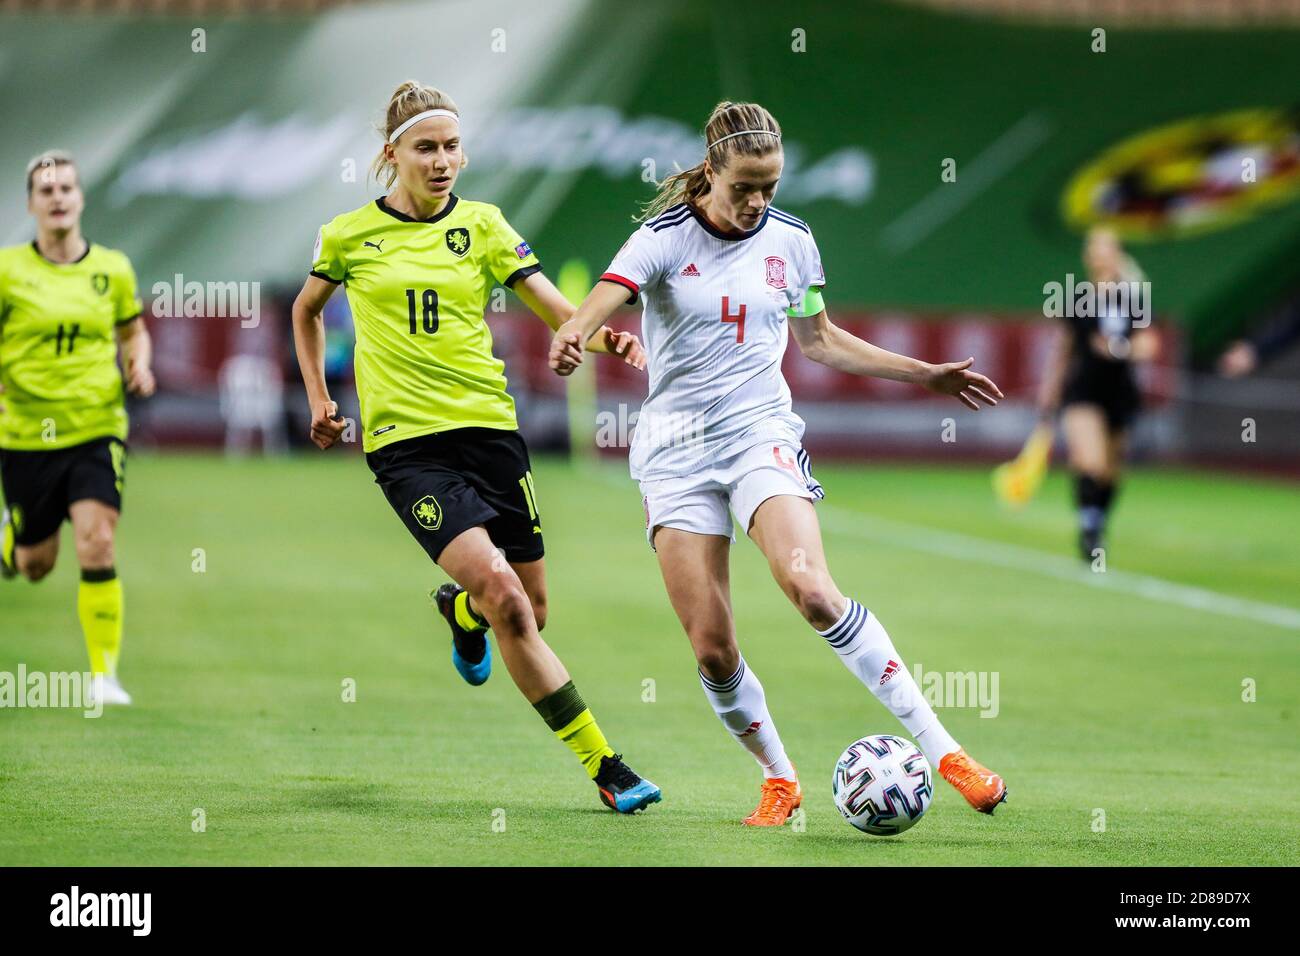 Paredes of Spain and Kamila Dubcova of Czech Republic during the UEFA Women's Euro 2022, qualifying football match between Spain and Czech Republic  C Stock Photo